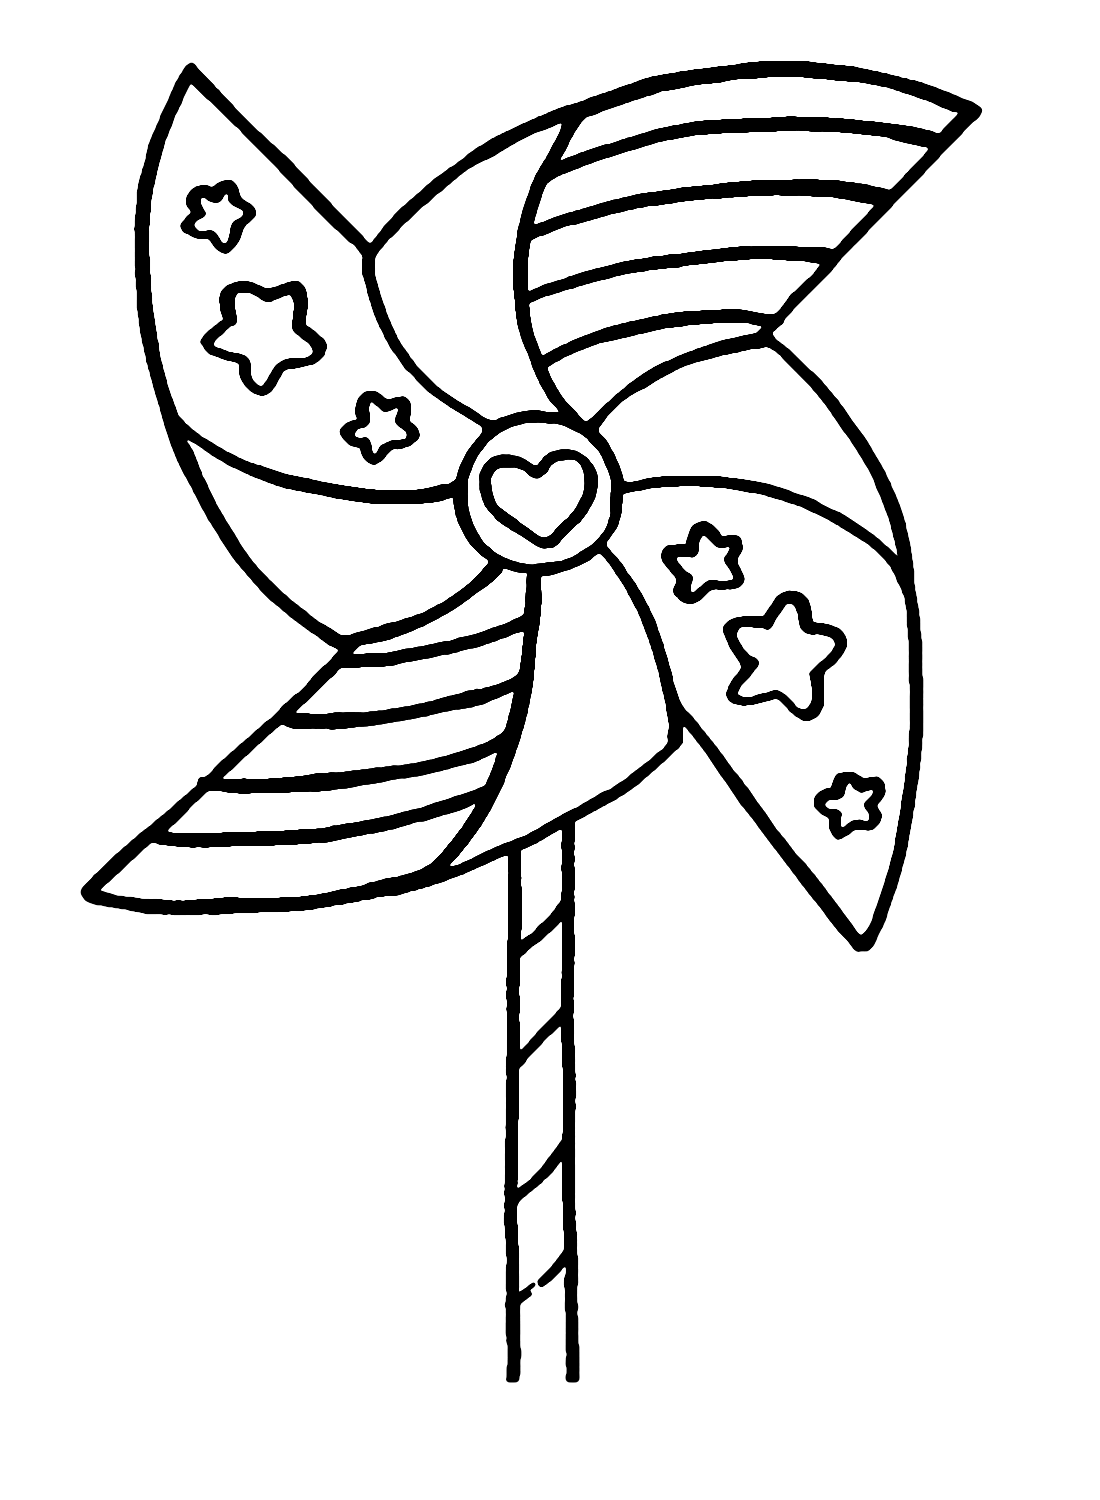 Lovely Pinwheel Coloring Page